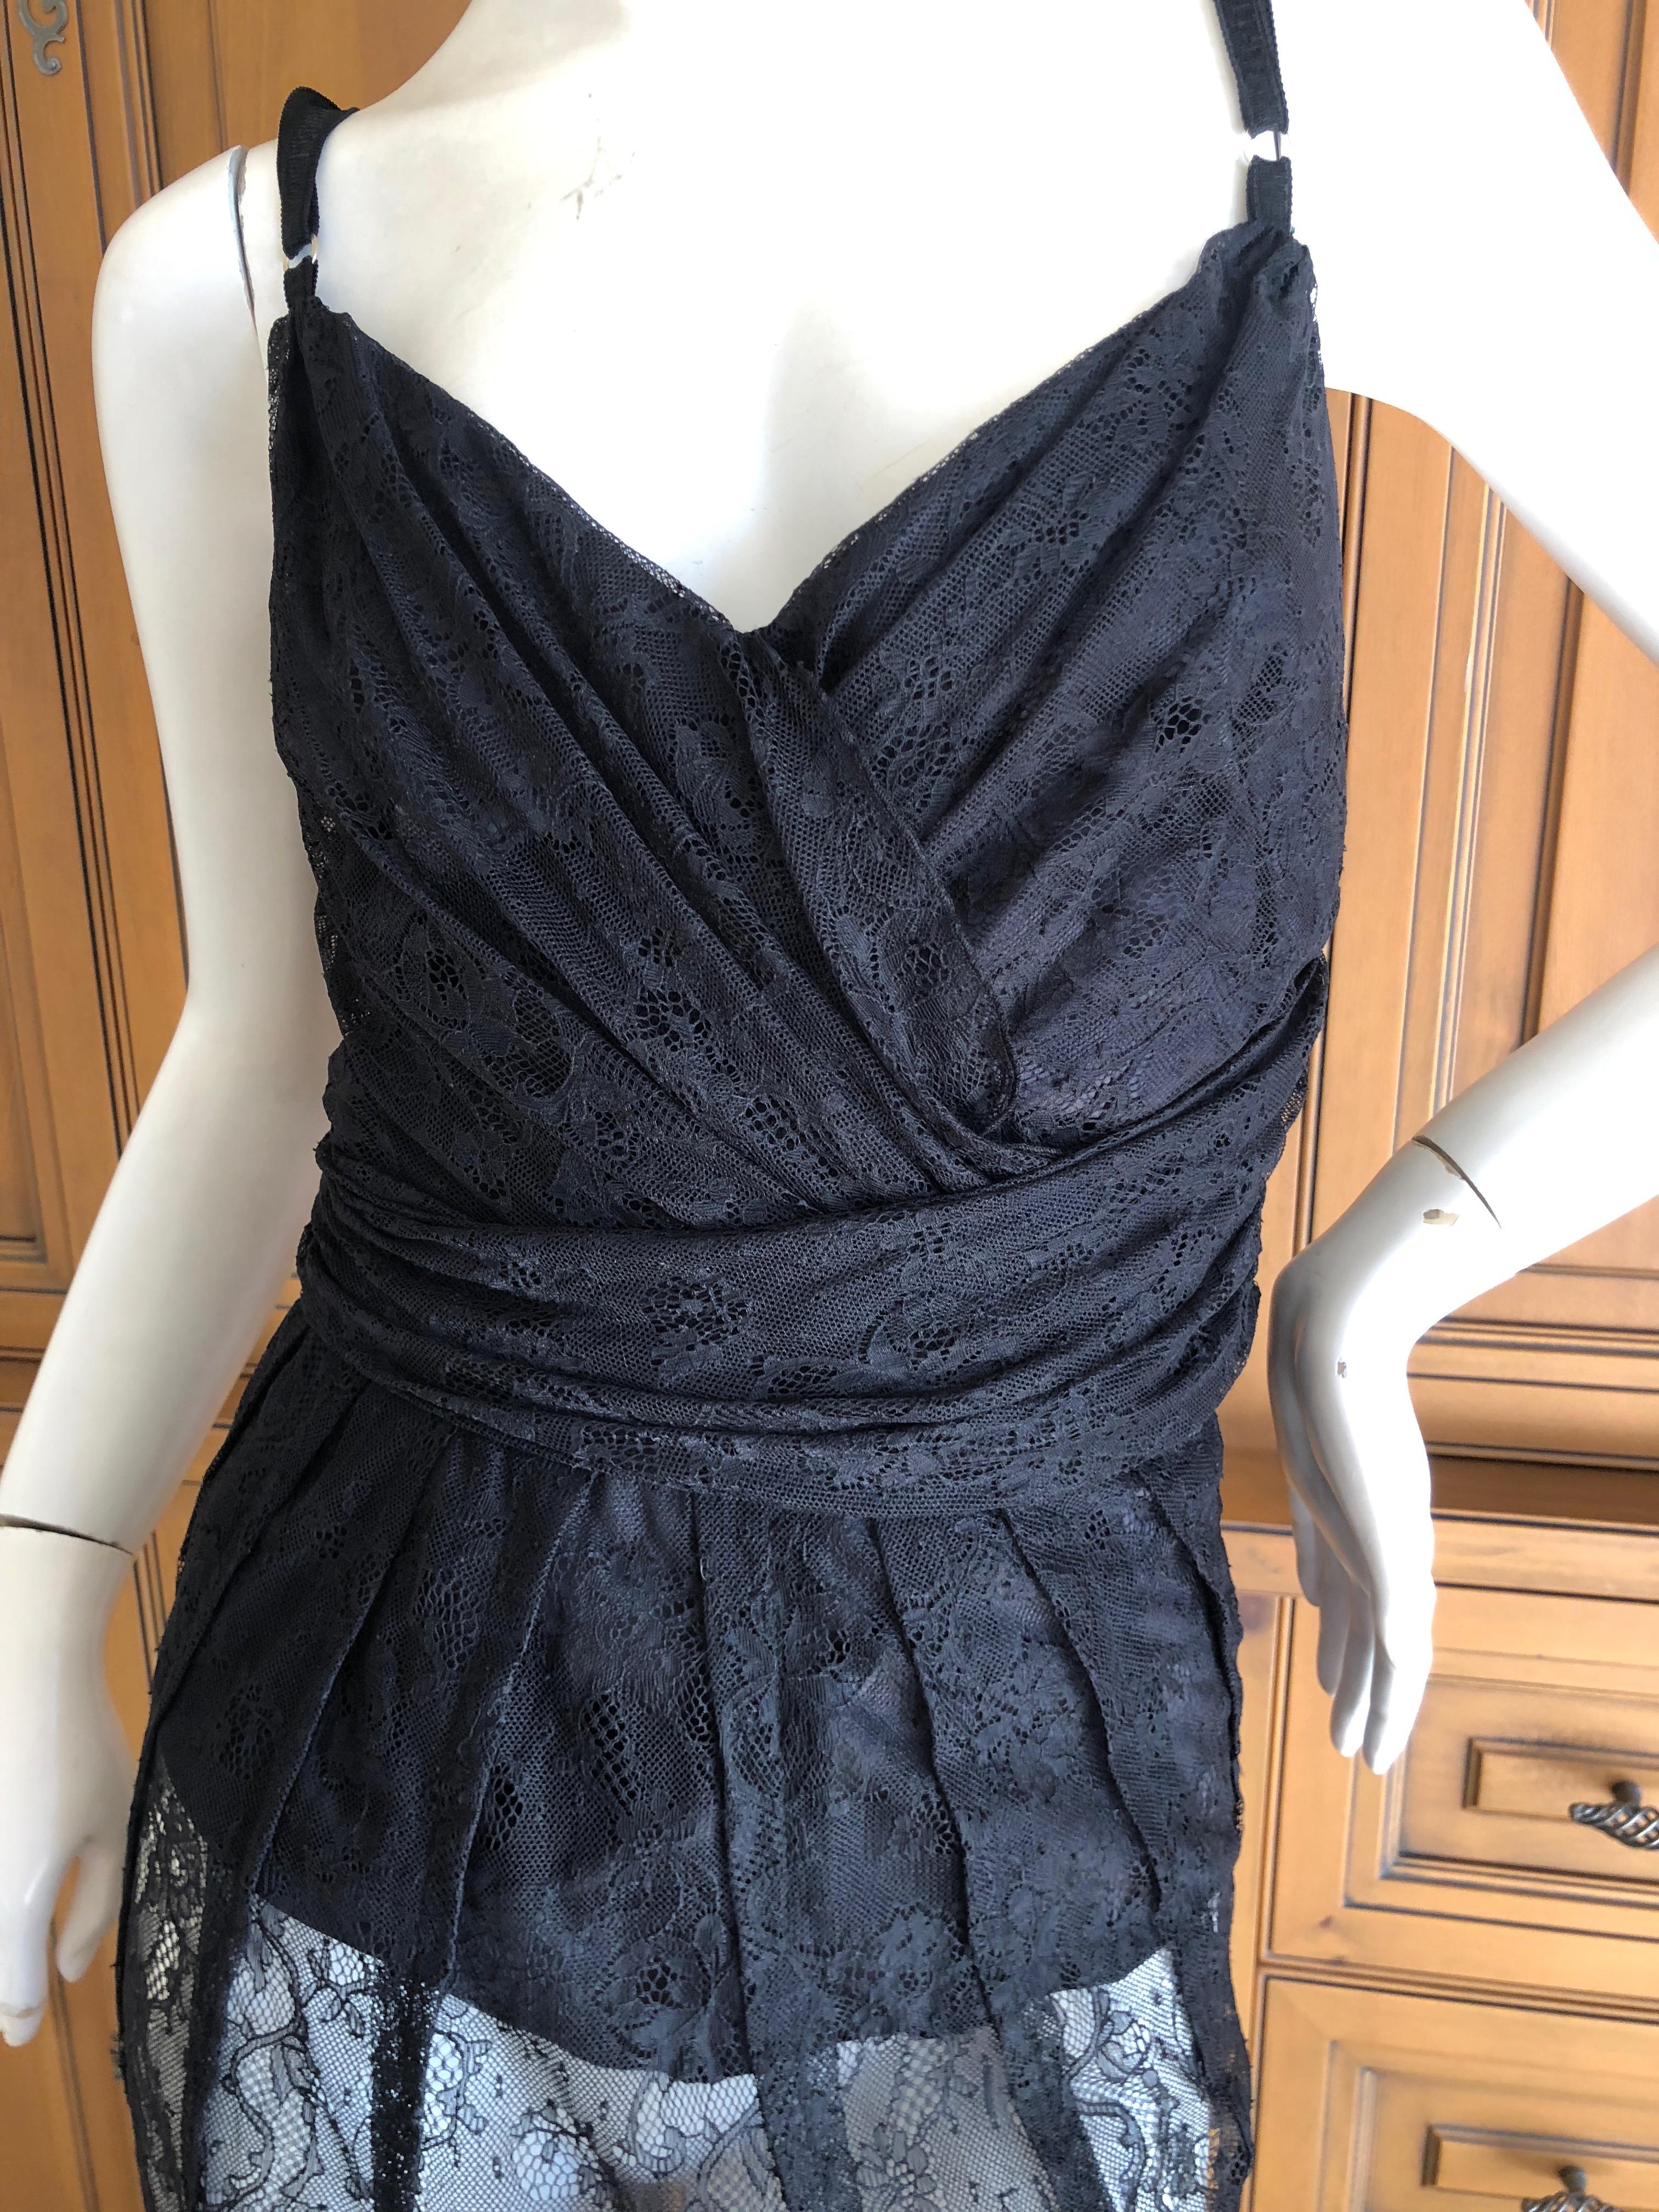 D&G Dolce & Gabbana Sheer Black Lace Vintage Evening Dress with Train For Sale 2